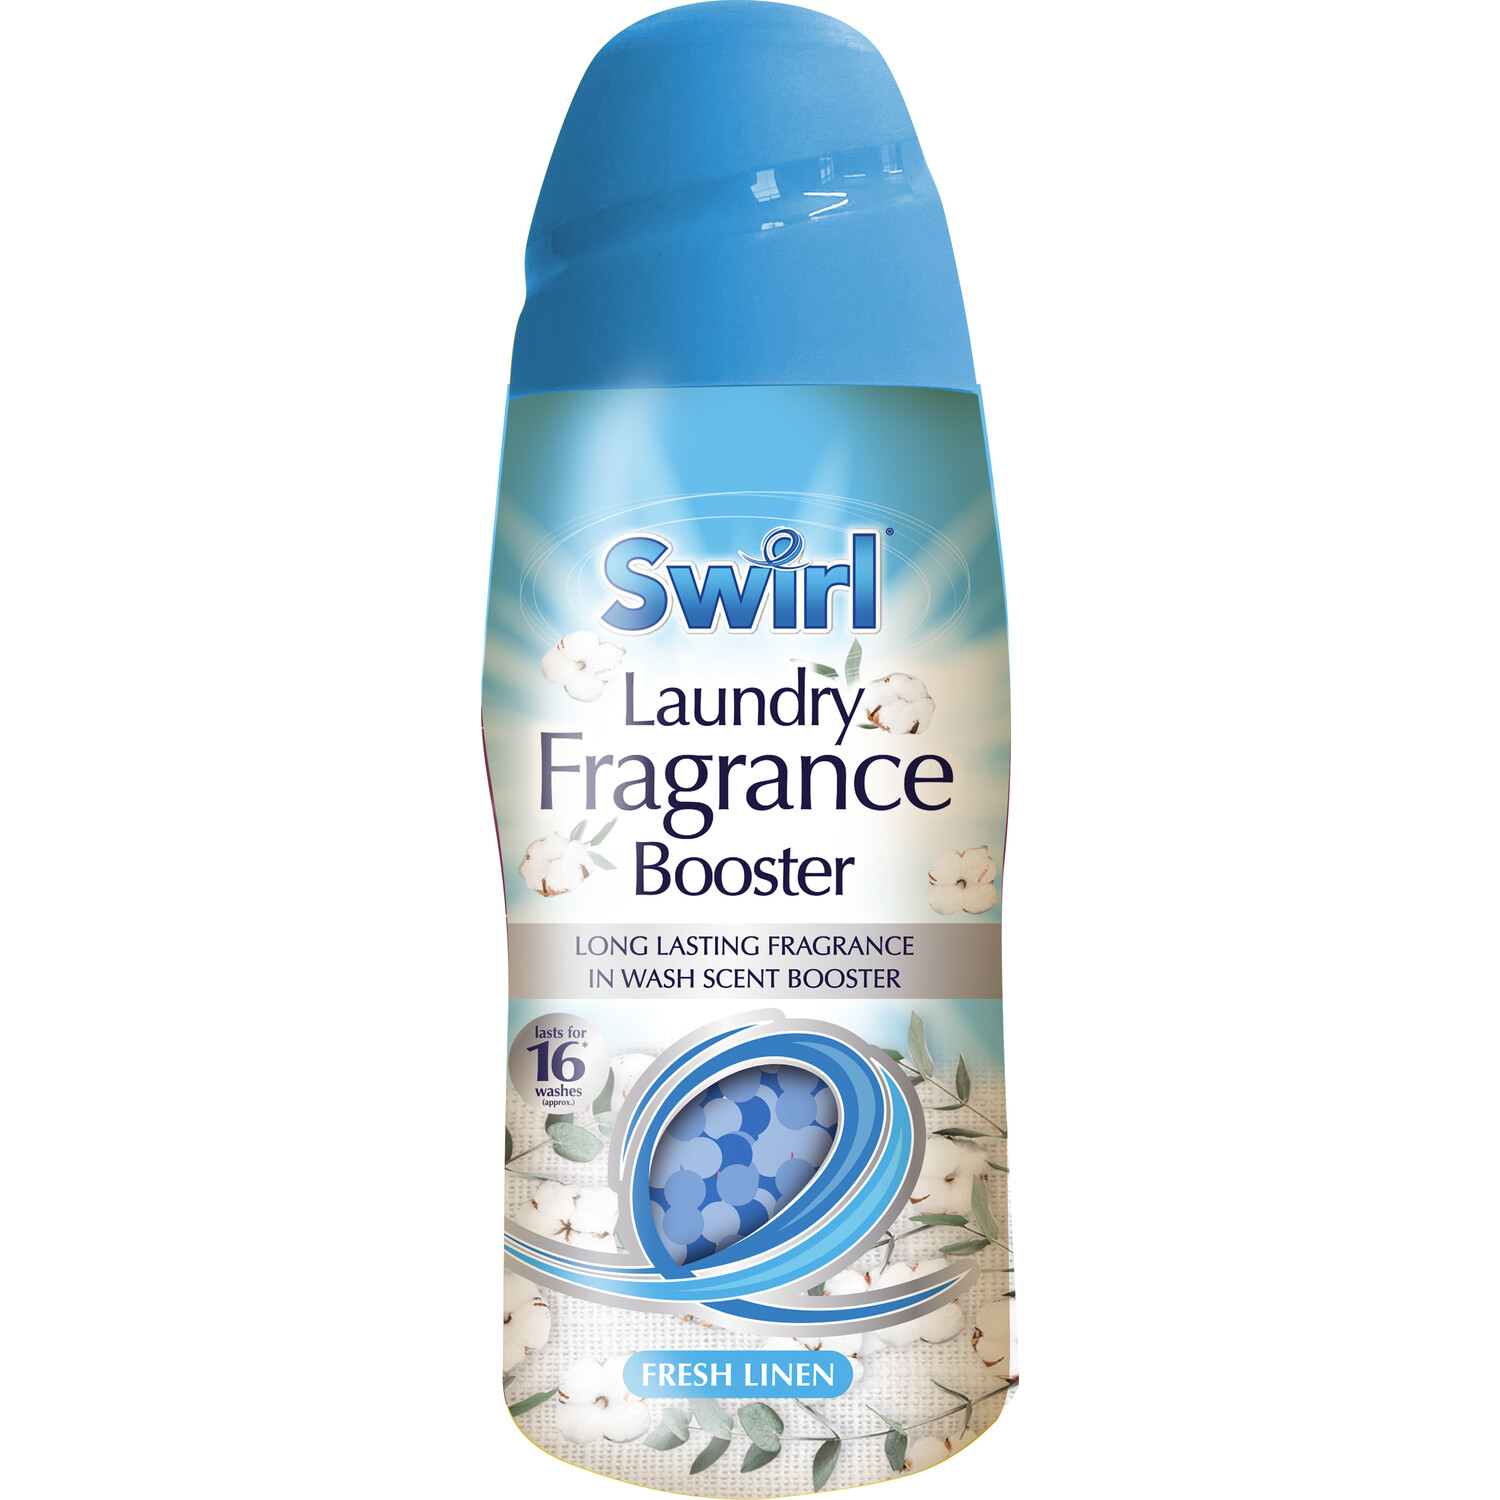 Swirl Fresh Linen Laundry Fragrance Booster 16 Washes 350g Image